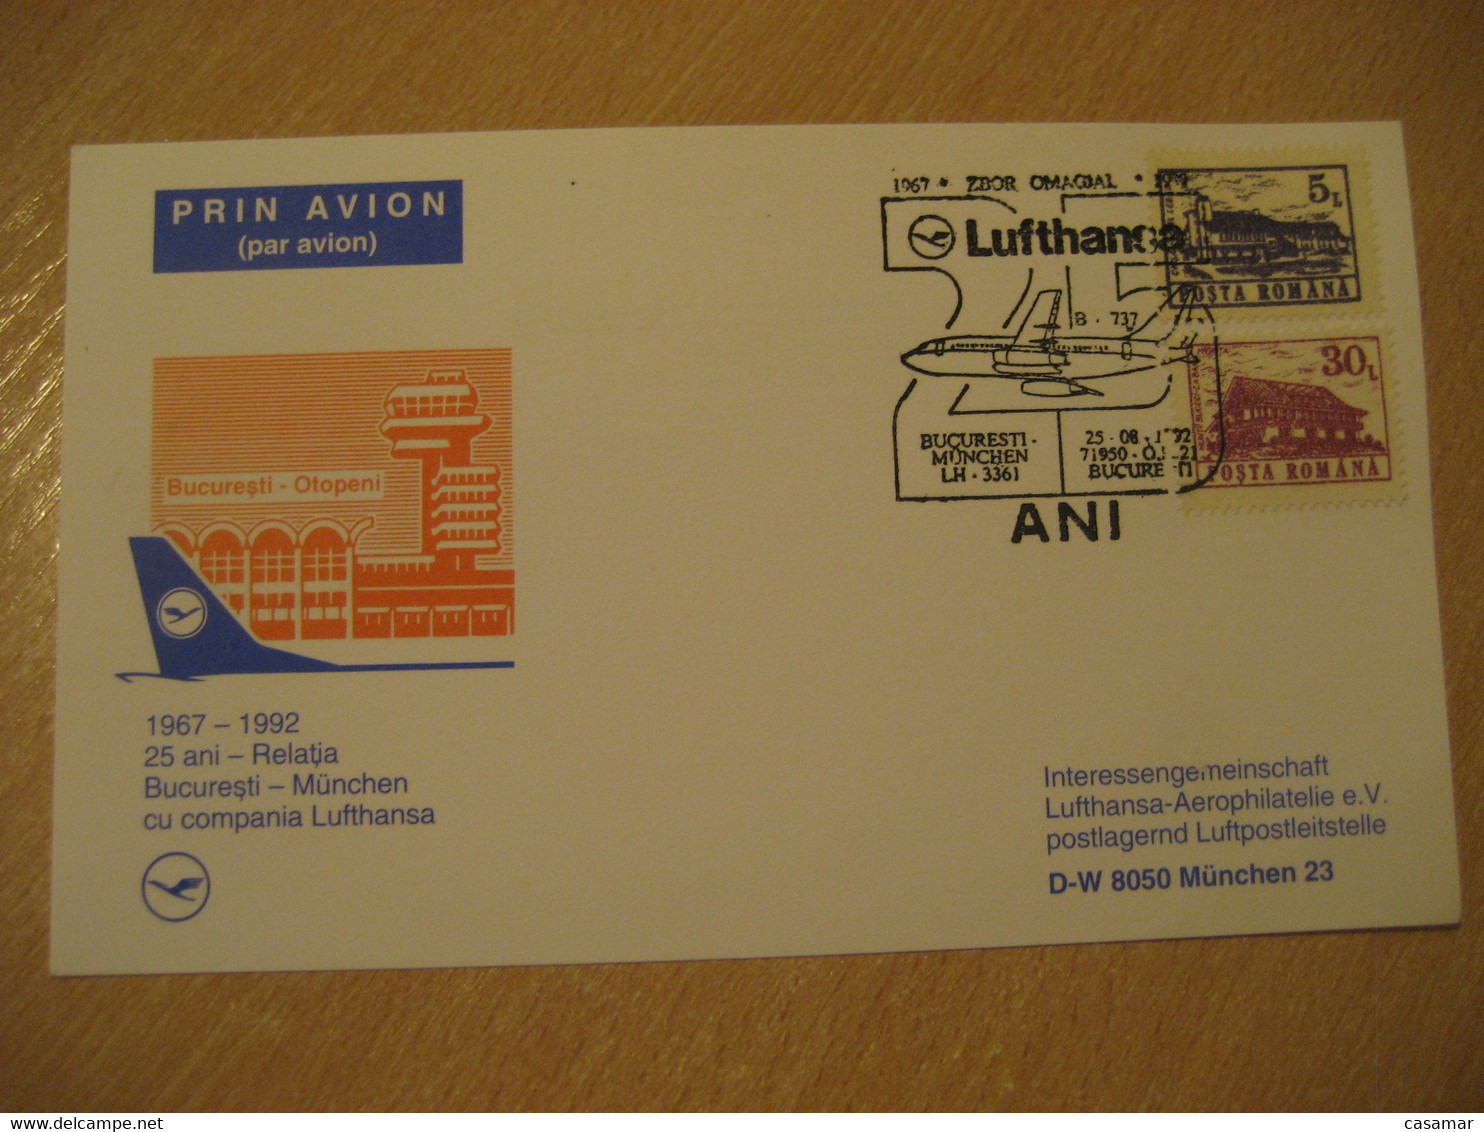 BUCHAREST Munich 1992 Lufthansa Airlines Airline 25 Year First Flight Black Cancel Card ROMANIA GERMANY - Covers & Documents